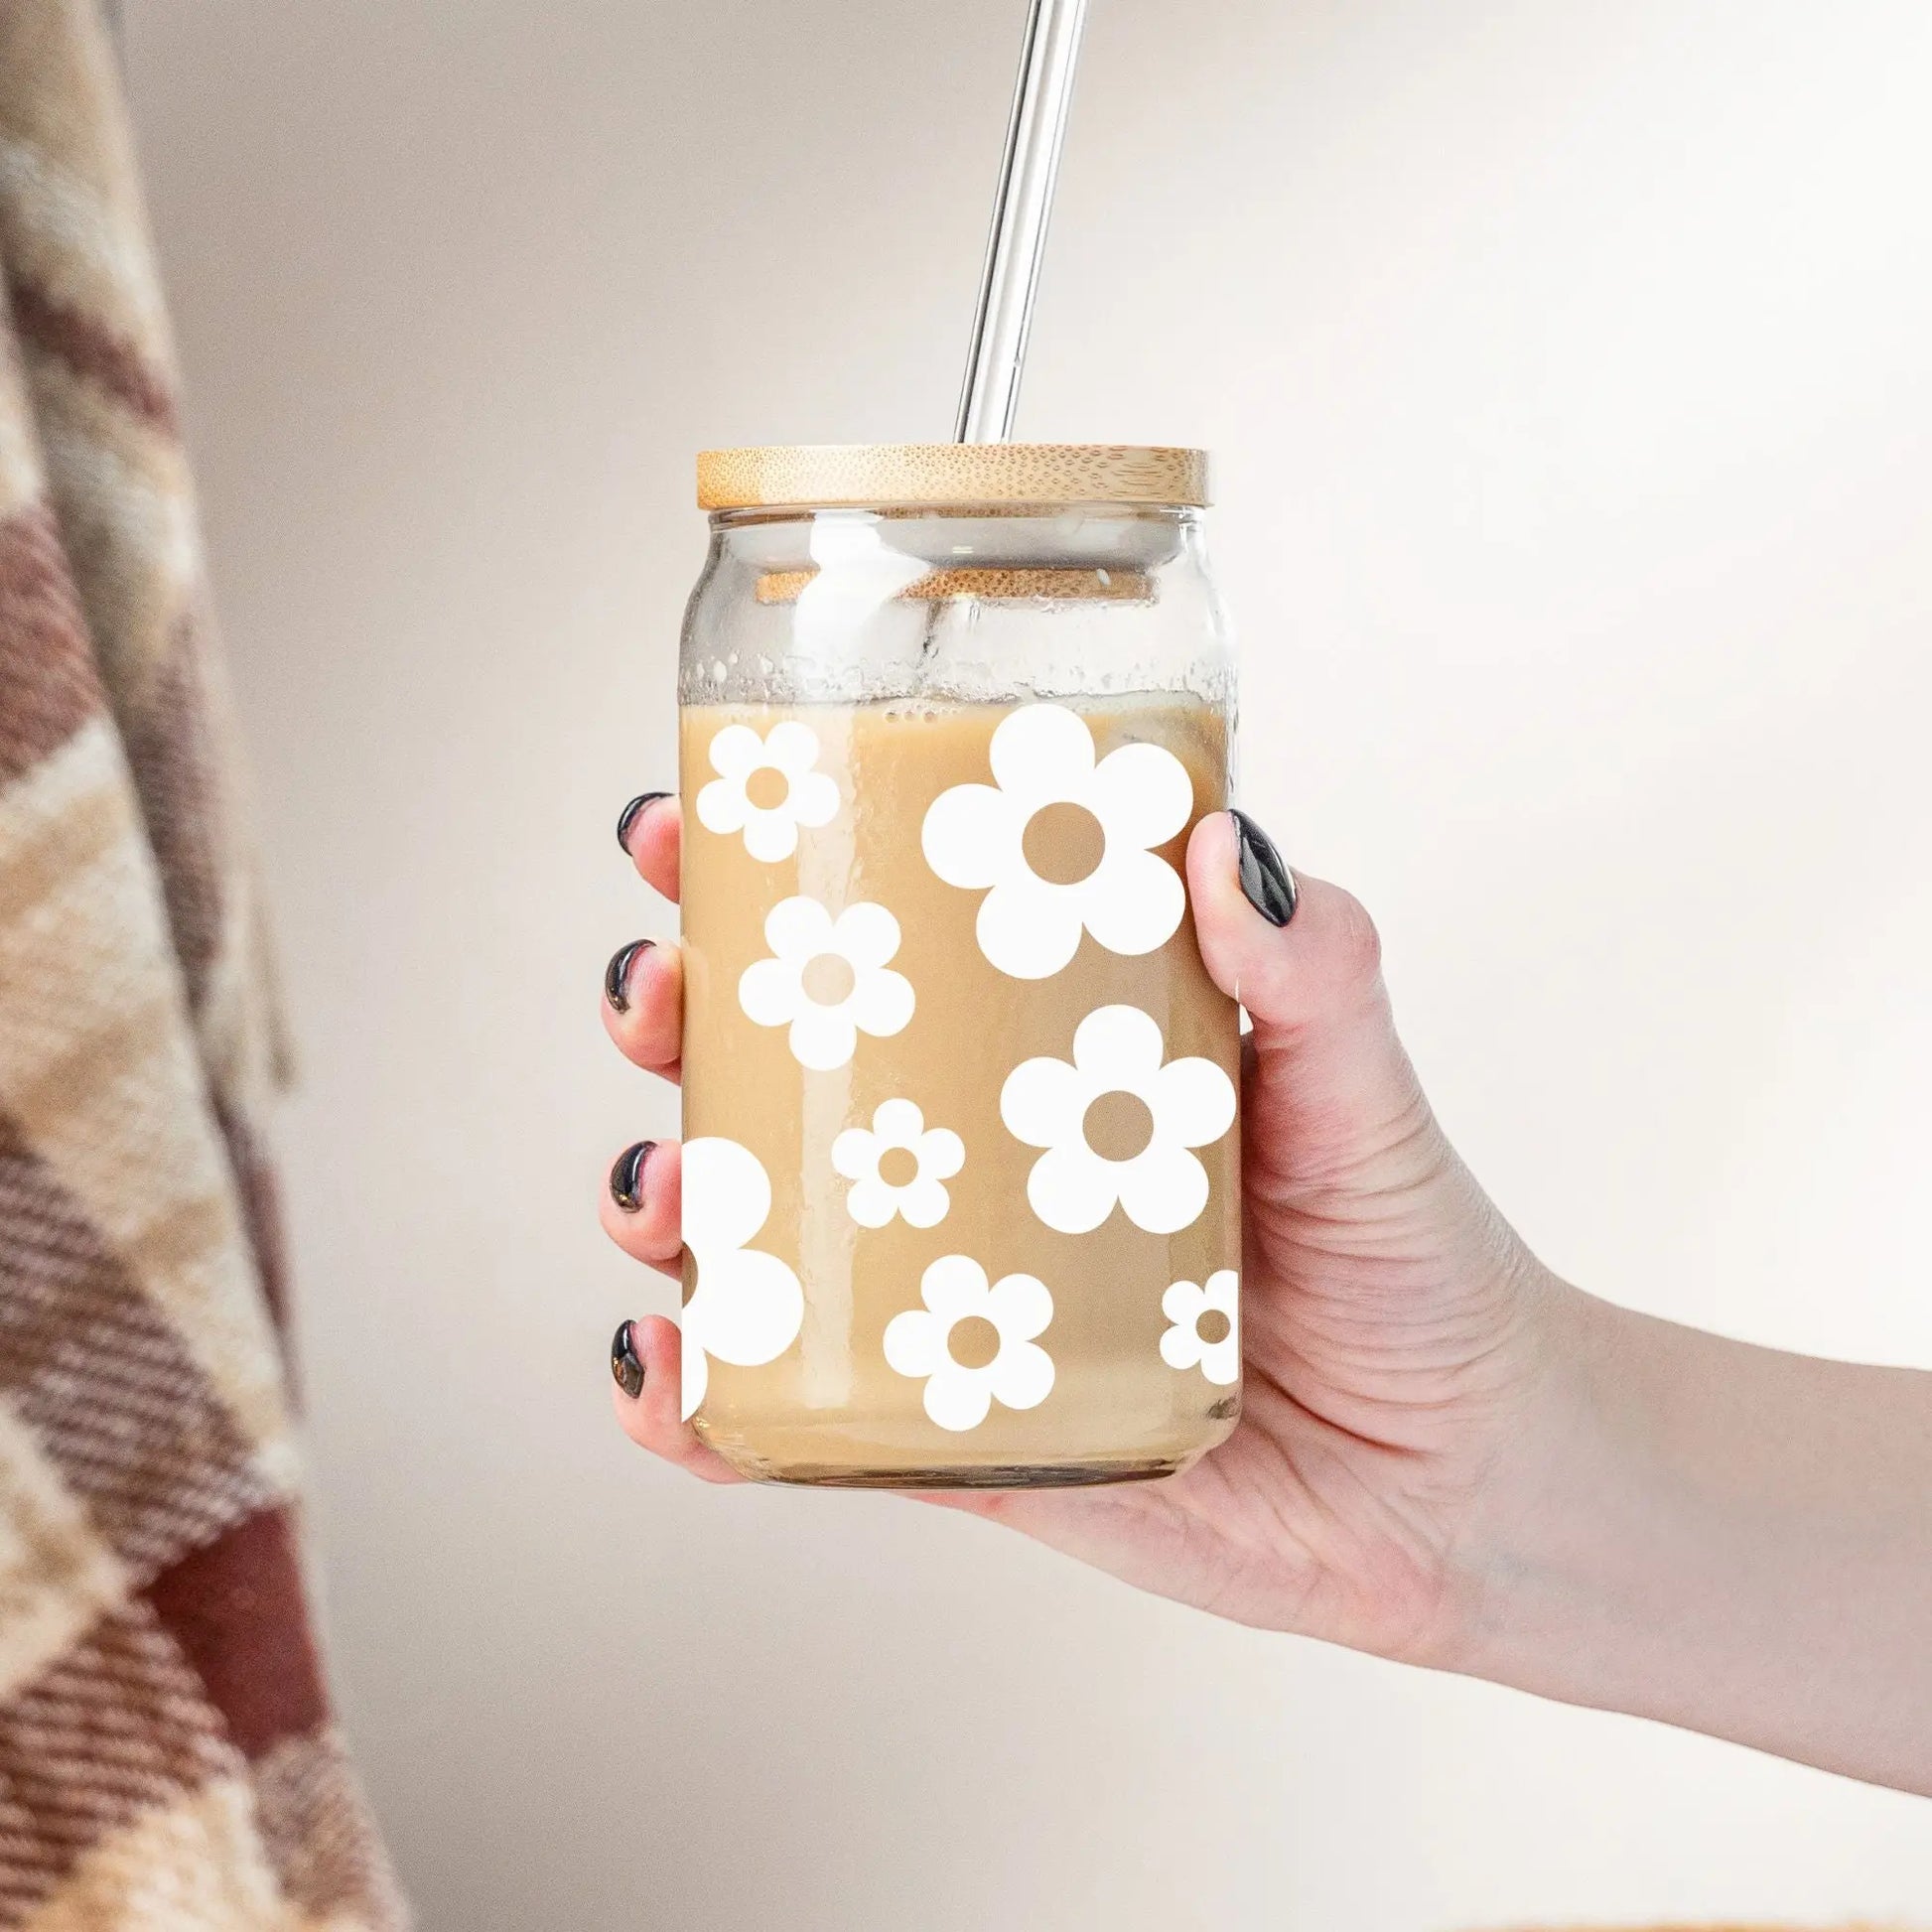 Retro Daisy Iced Coffee Cup with Lid & Straw, 16oz Tumbler, Ombre Flowers Amazing Faith Designs